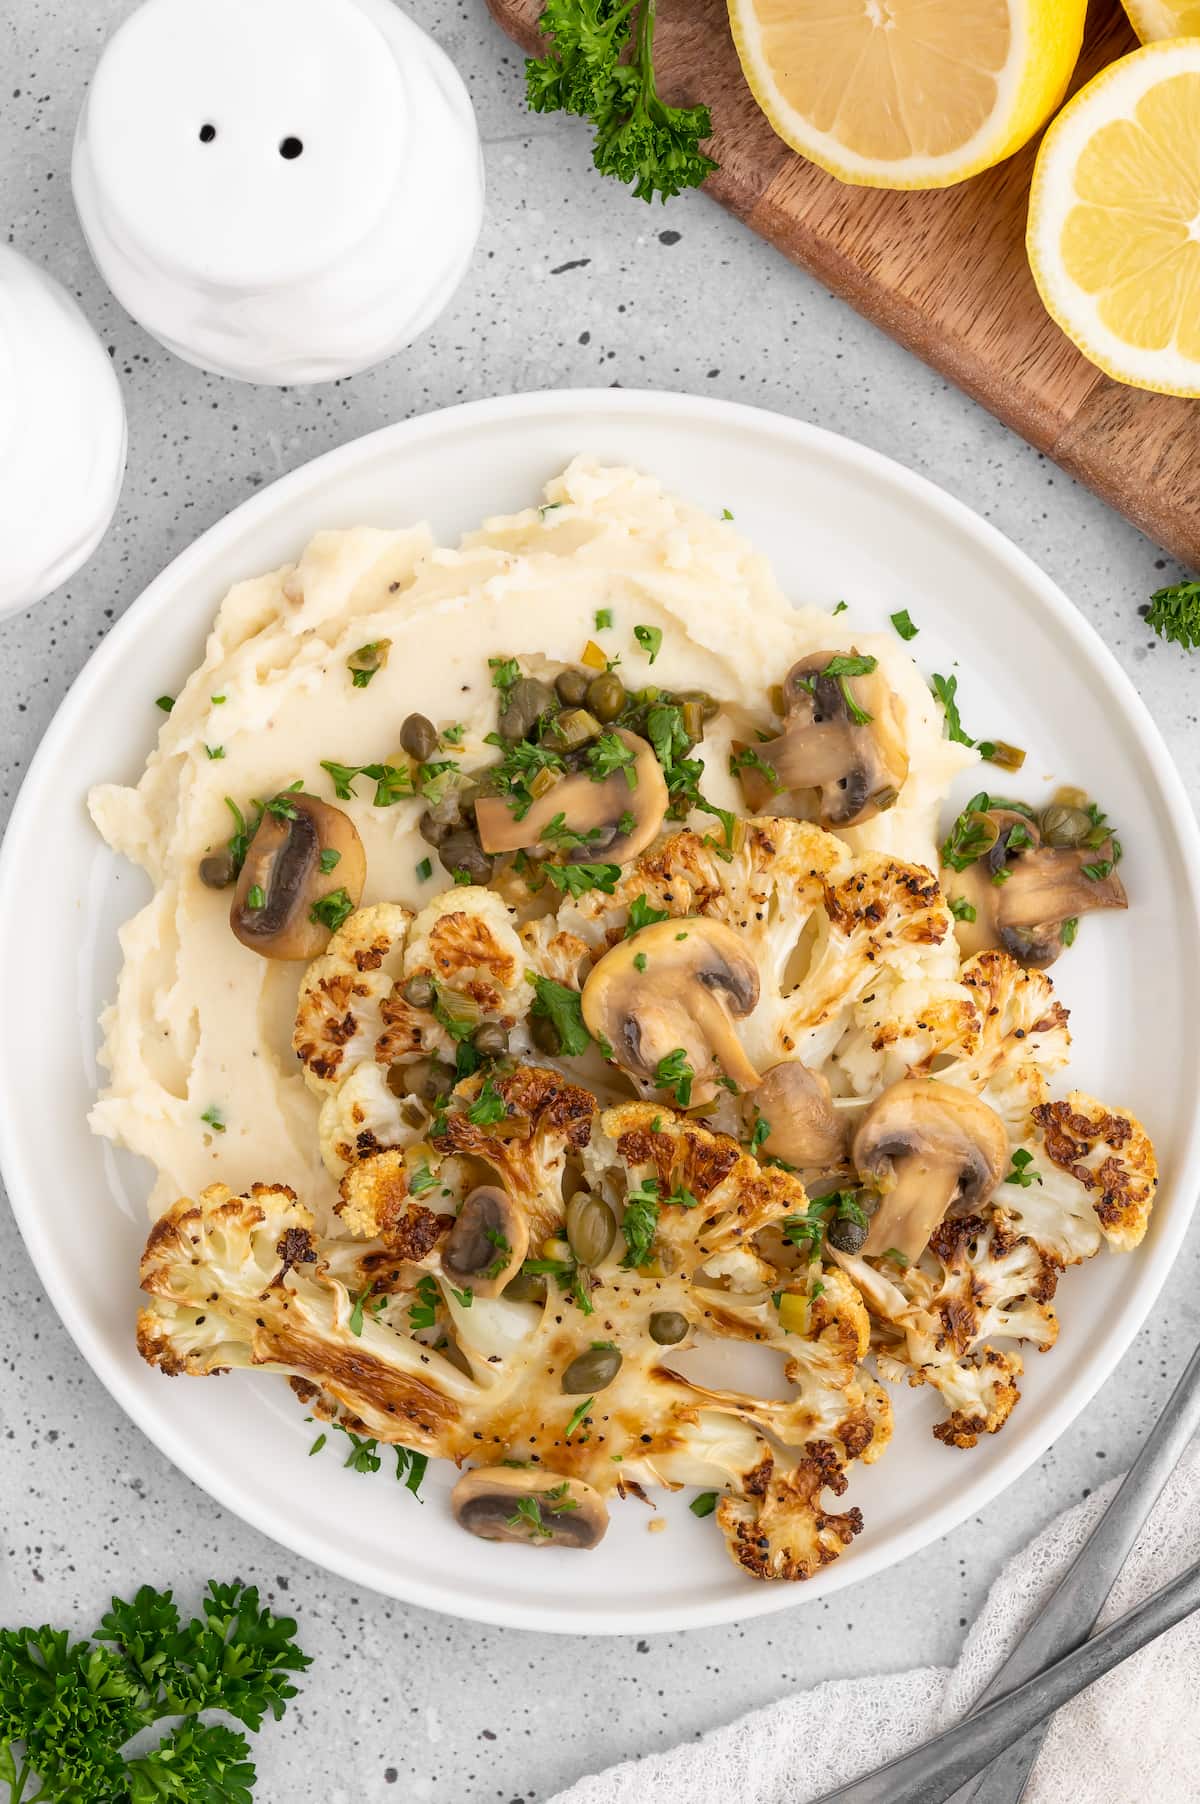 Cauliflower steaks served on a plate with mashed potatoes and piccata sauce.